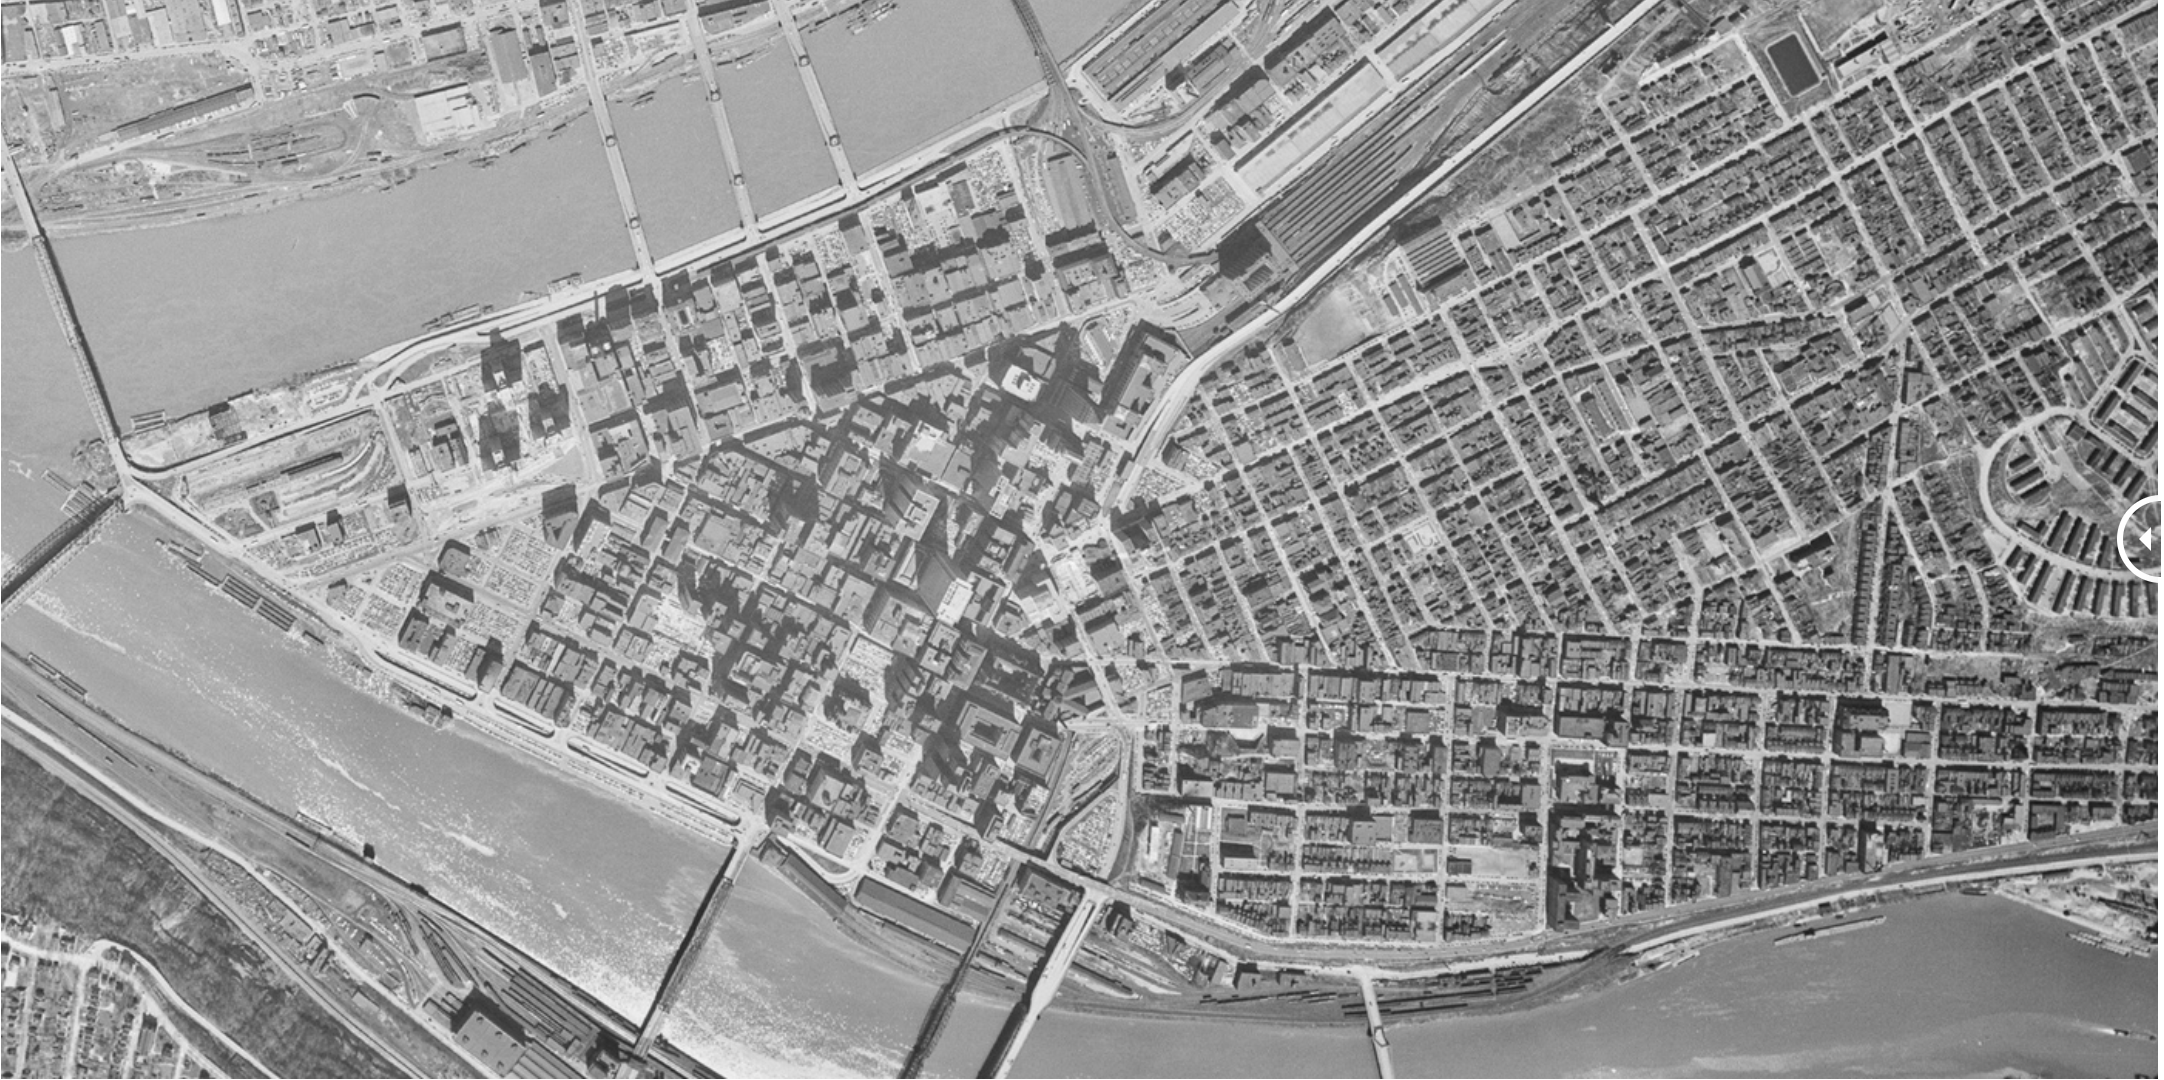 Downtown Pittsburgh 1954 Before Federal Highway Construction and Urban renewal. Figure from [iqc](https://iqc.ou.edu/2015/01/21/60yrsnortheast/)